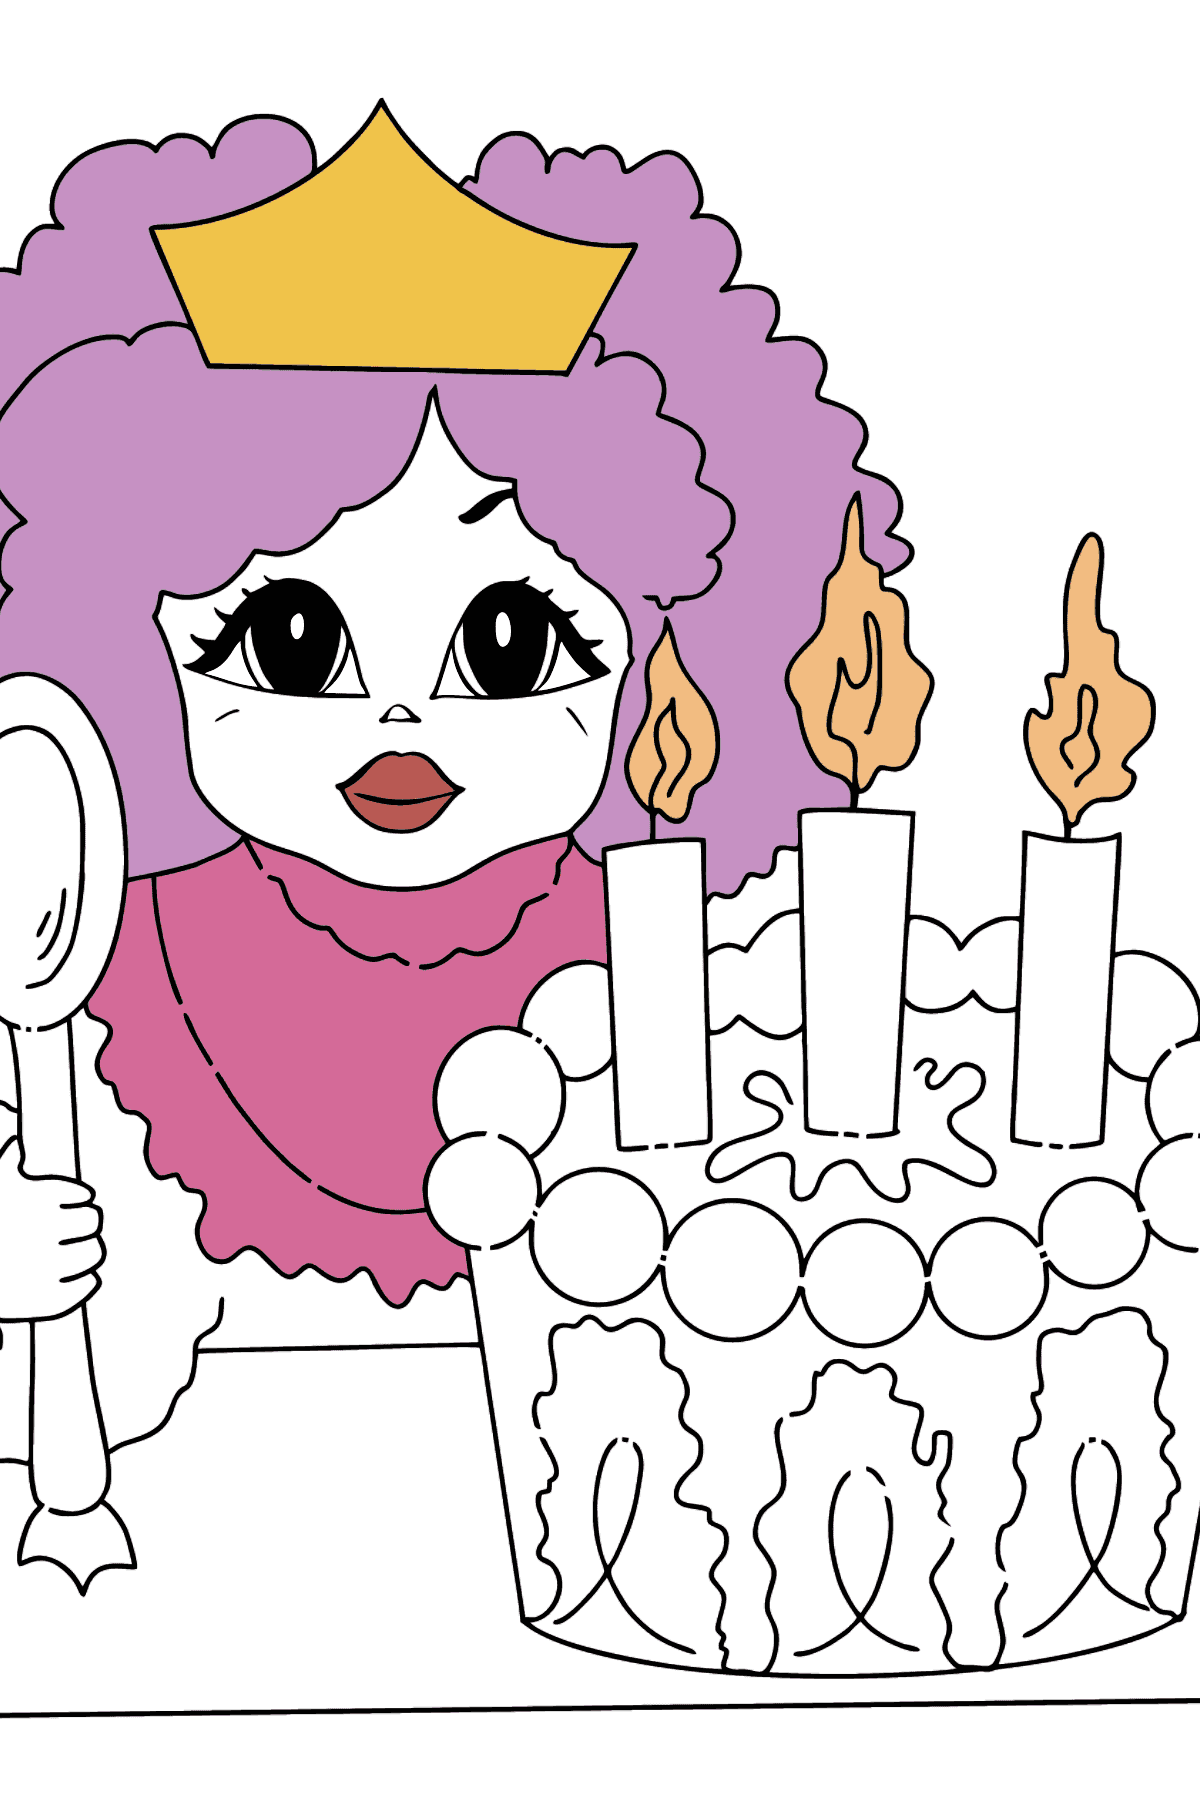 Greedy princess coloring page (simple) - Coloring Pages for Kids